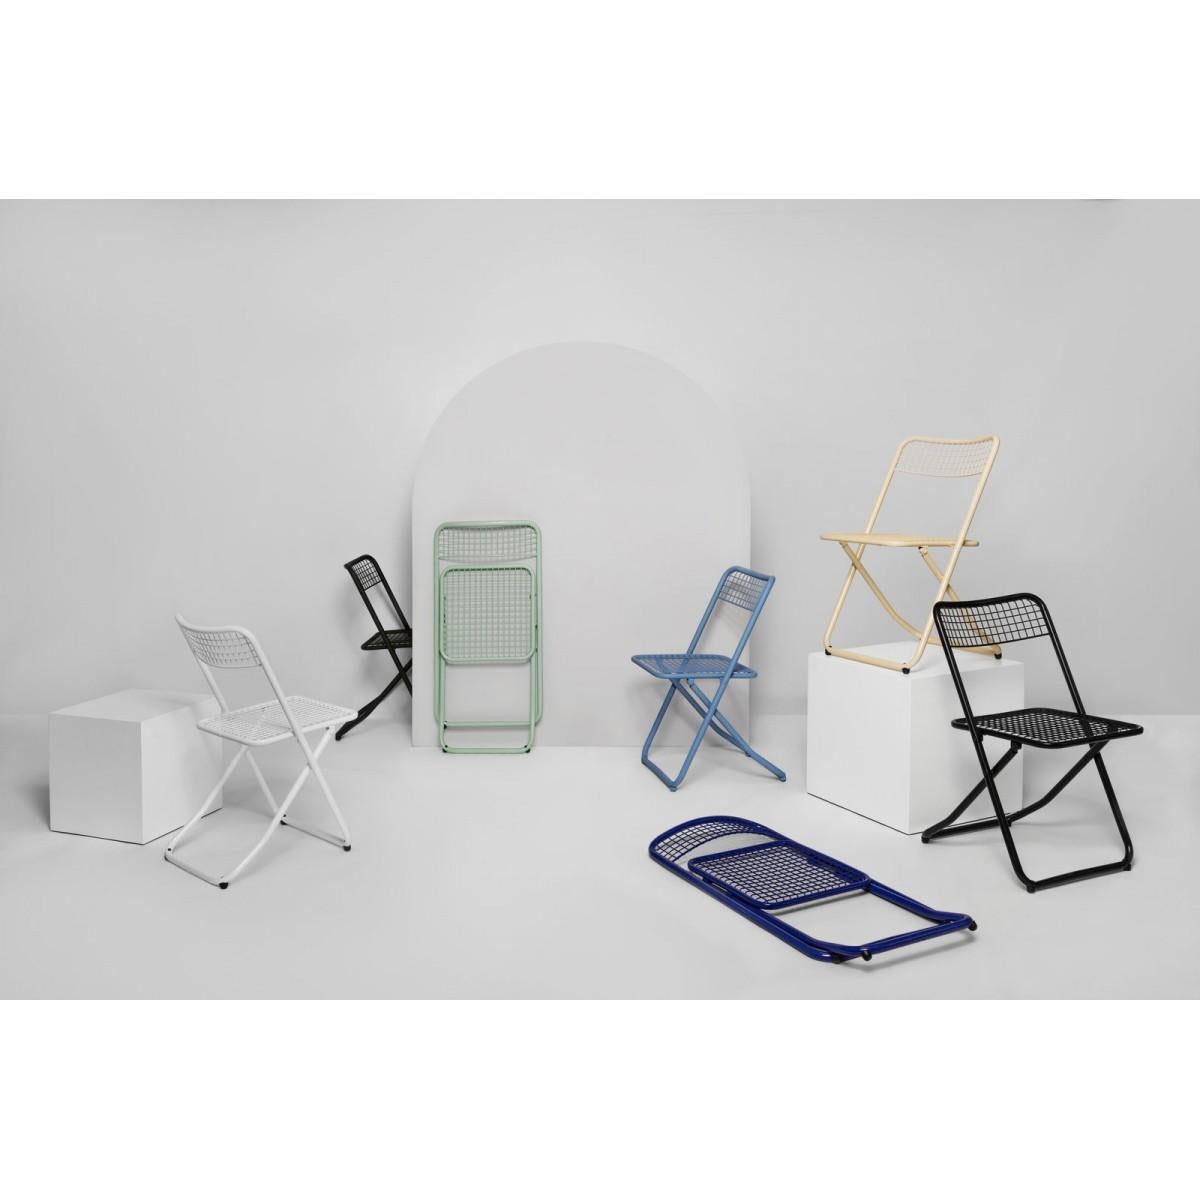 New Folding Iron Chair Make Up 3012 by Houtique signed by Federico Giner, Spain 4